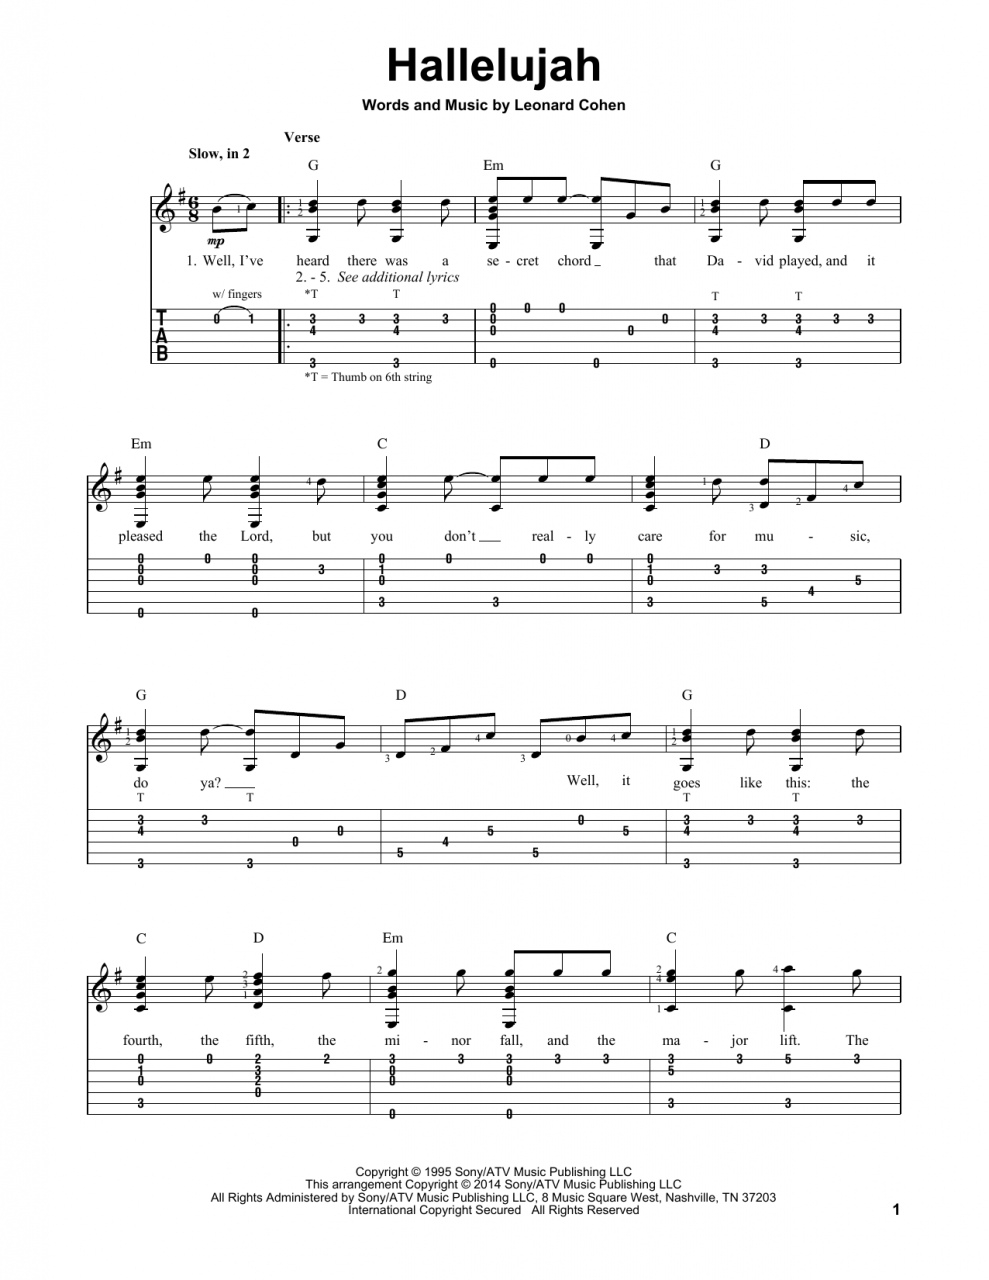 Thinking Out Loud Chords Sheet Music For Ed Sheeran Thinking Out Loud Leonard Cohen